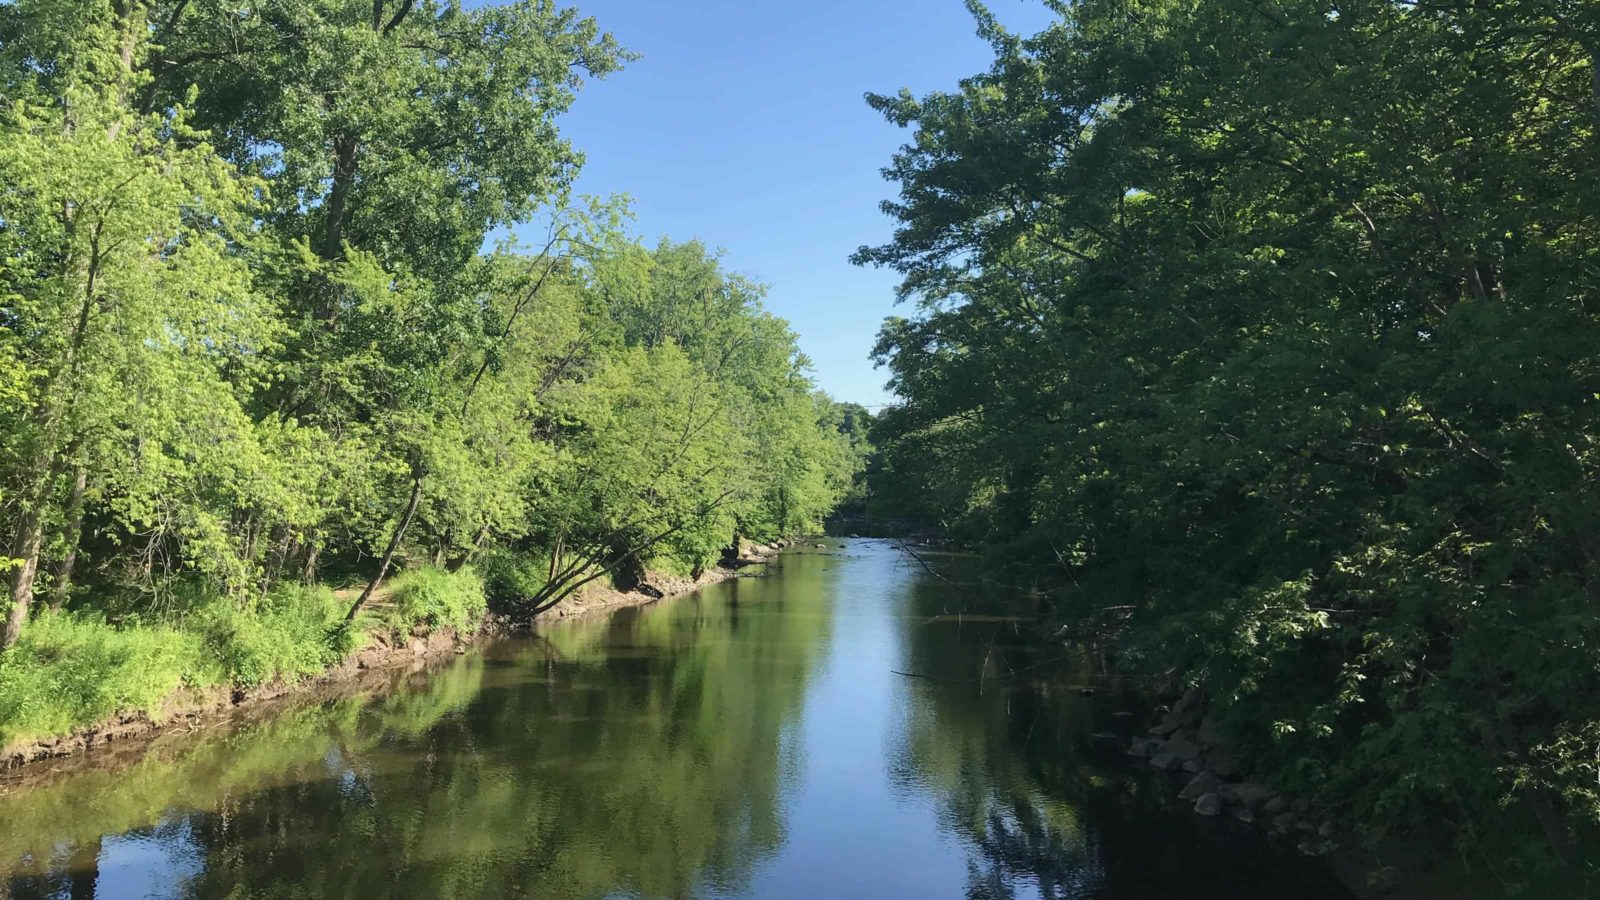 The Housatonic River glimmers in morning light in Great Barrington.